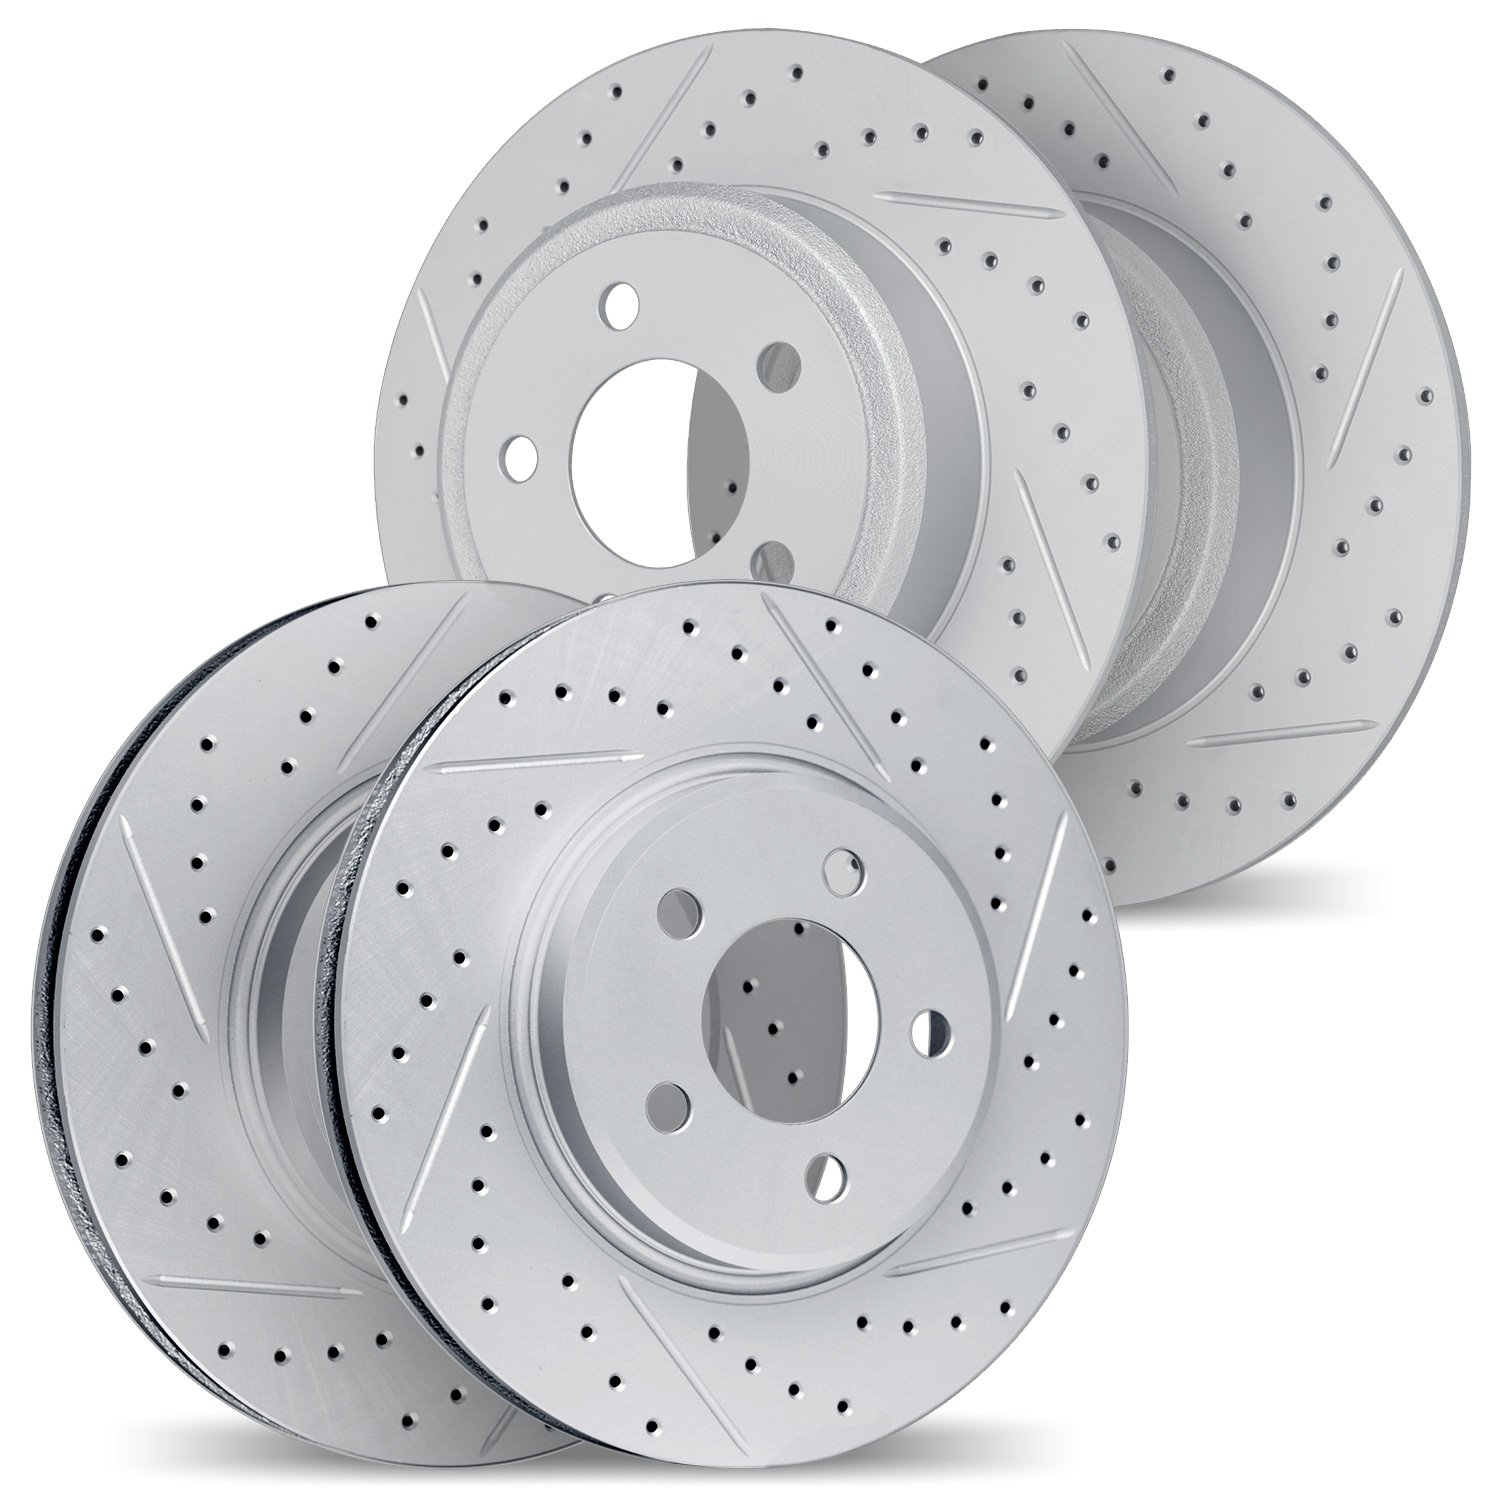 2004-11014 Geoperformance Drilled/Slotted Brake Rotors, 1994-2002 Land Rover, Position: Front and Rear